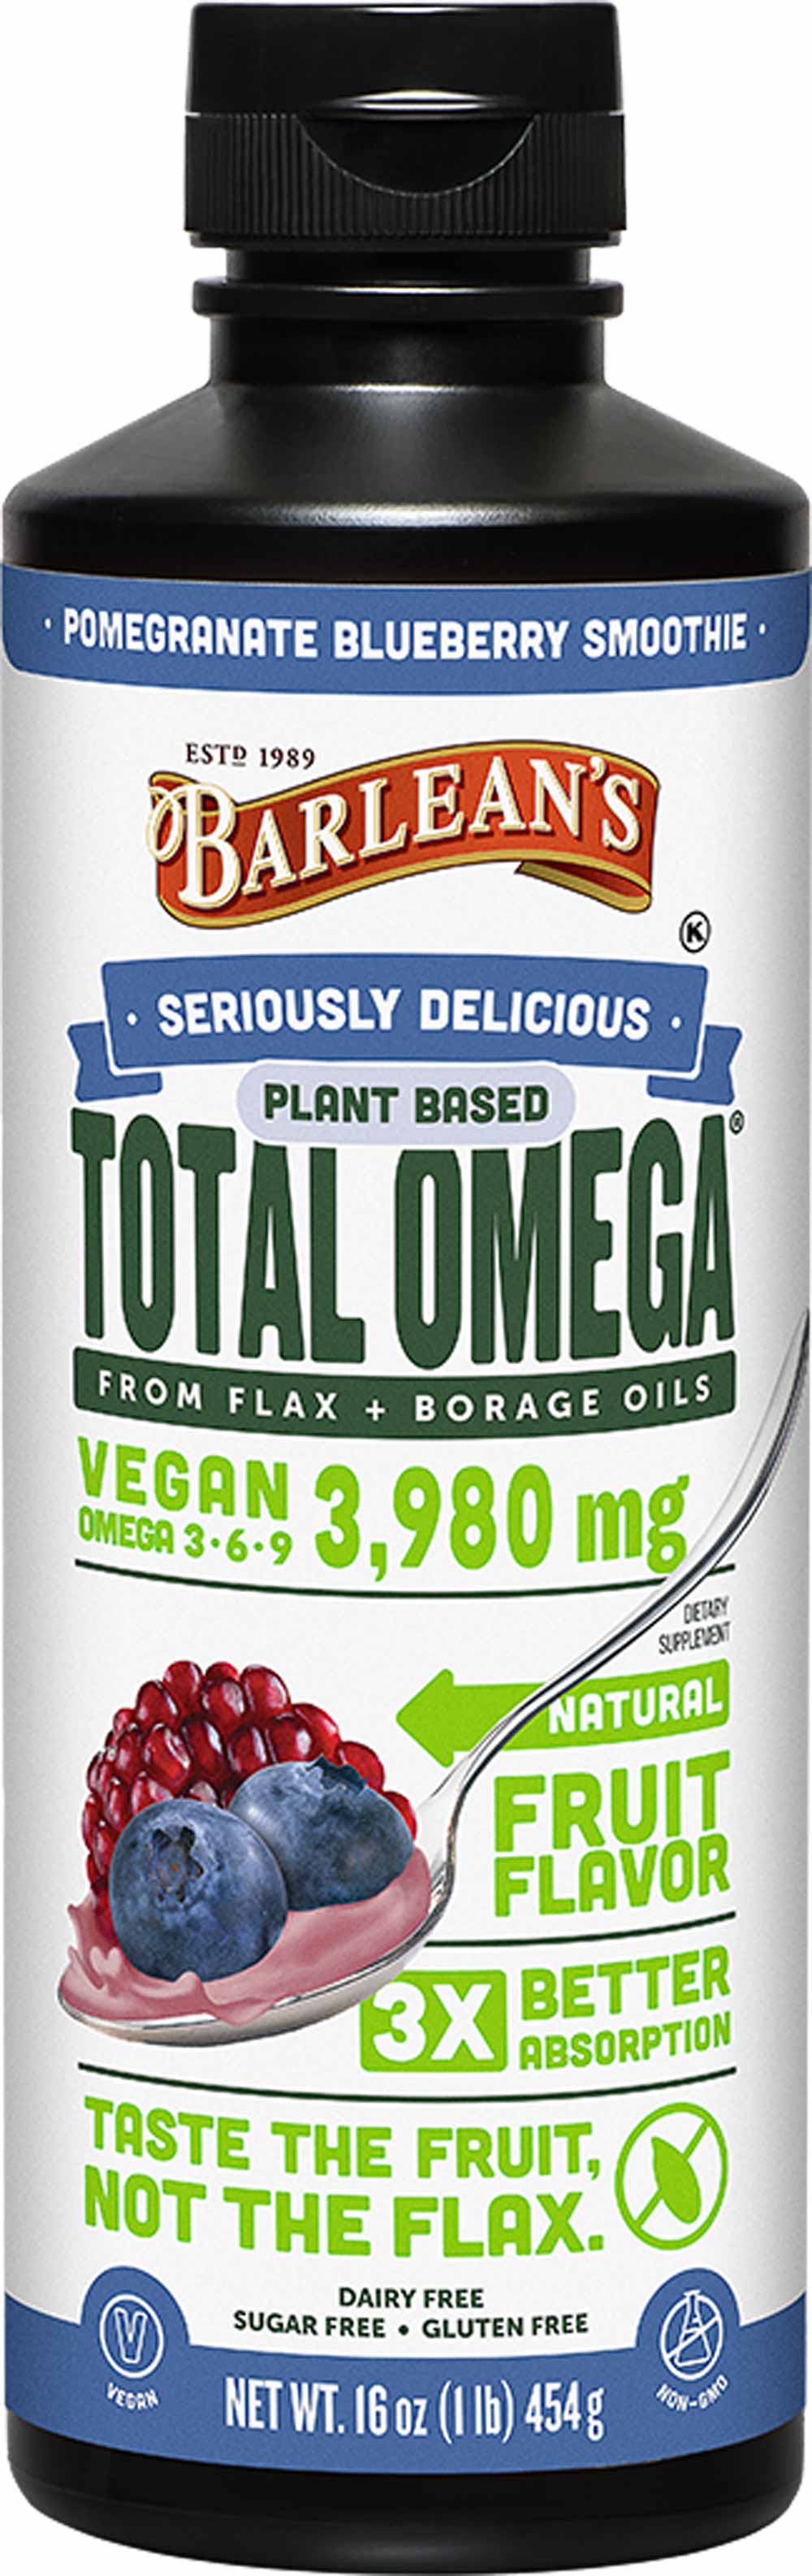 Barlean's Organic Oils Seriously Delicious™ Total Omega® Vegan Pomegranate Blueberry Smoothie